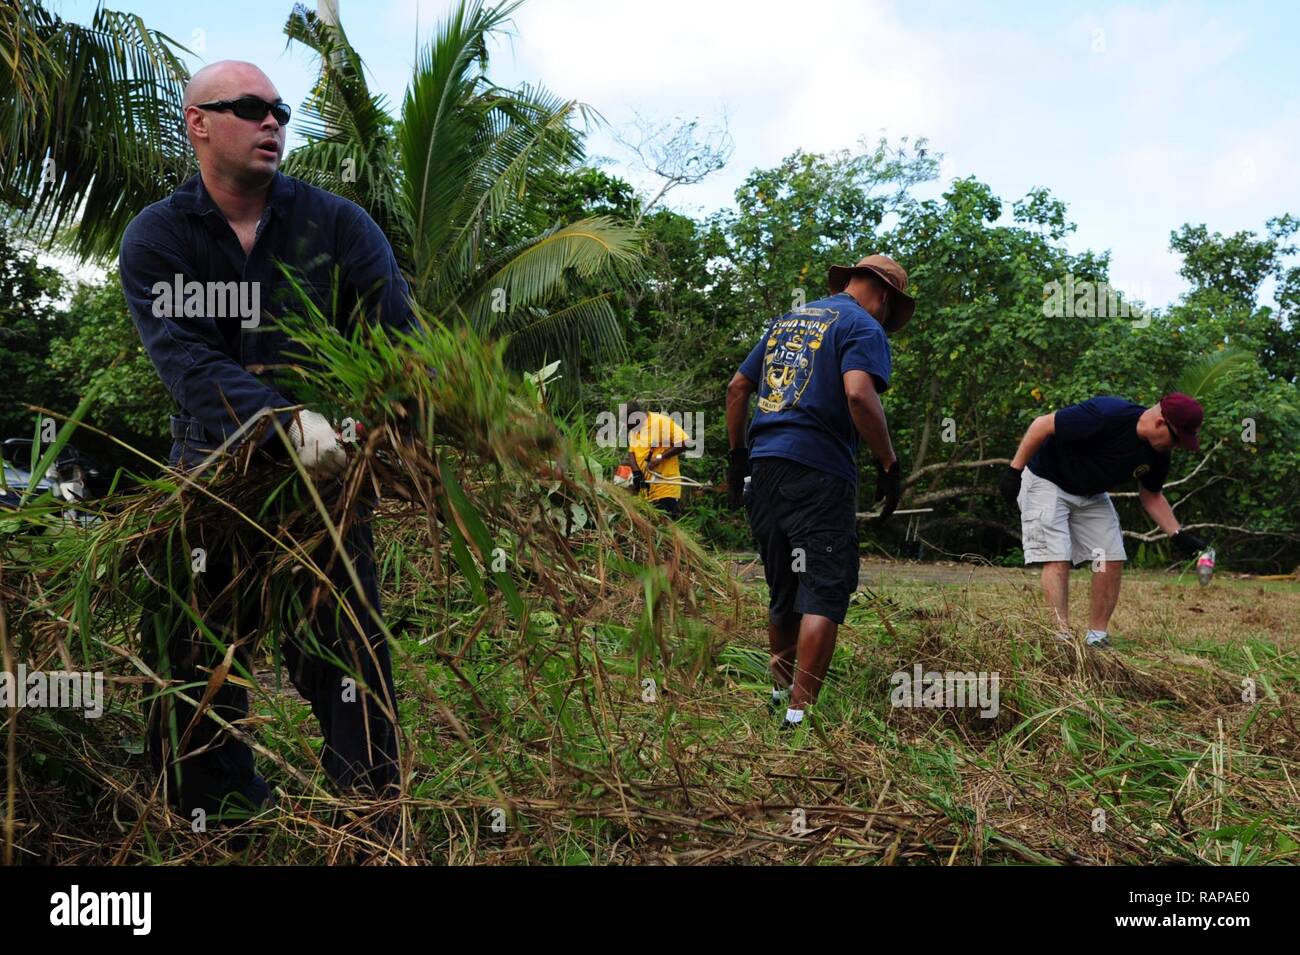 PITI, Guam (Feb. 25, 2017) - First class petty officers and chief petty officers, assigned to the submarine tender USS Frank Cable (AS 40), clean up around the Atantano Shrine in Piti, Guam Feb. 25, during a CPO 365 community relations project.  Frank Cable is forward deployed to the island of Guam and conducts maintenance and support of submarines and surface vessels deployed to the U.S. 5th and 7th Fleet area of operations. Stock Photo